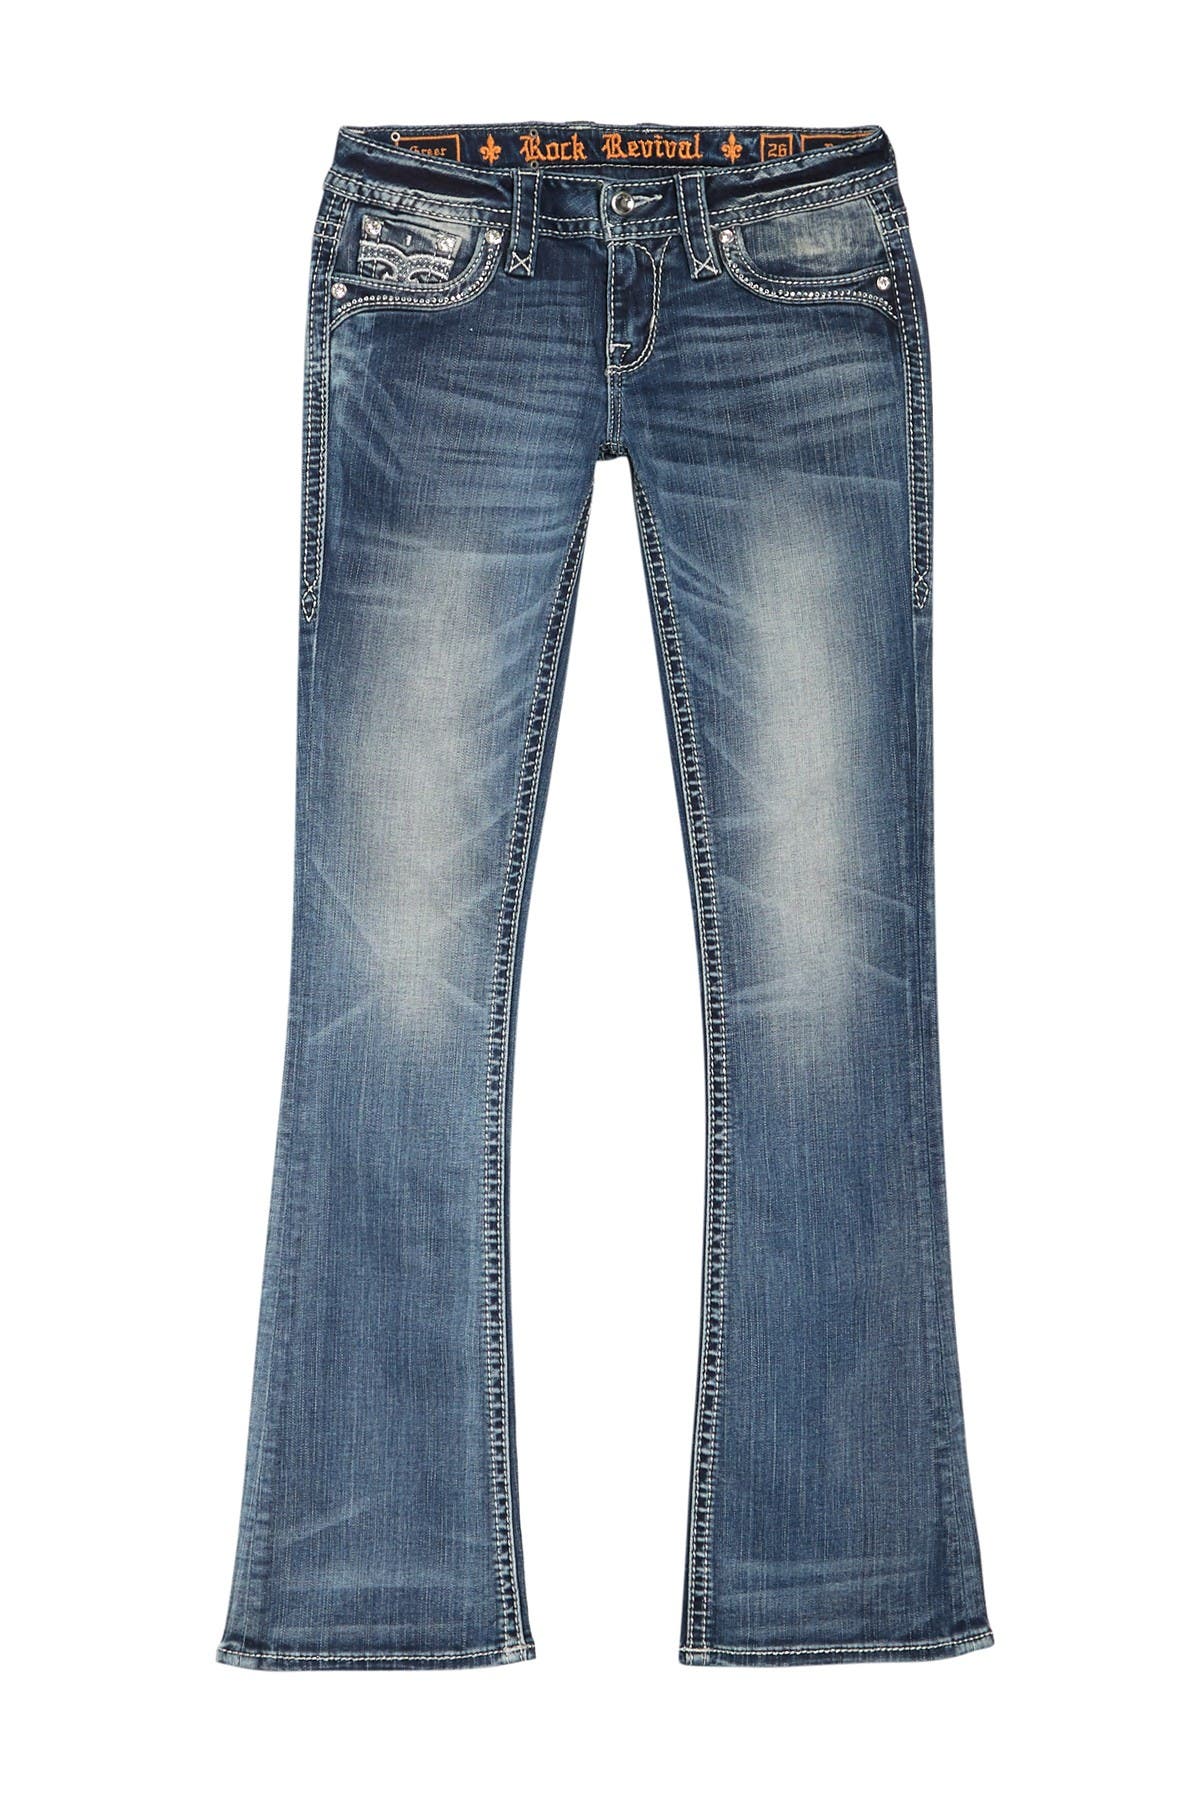 rock revival jeans mens clearance